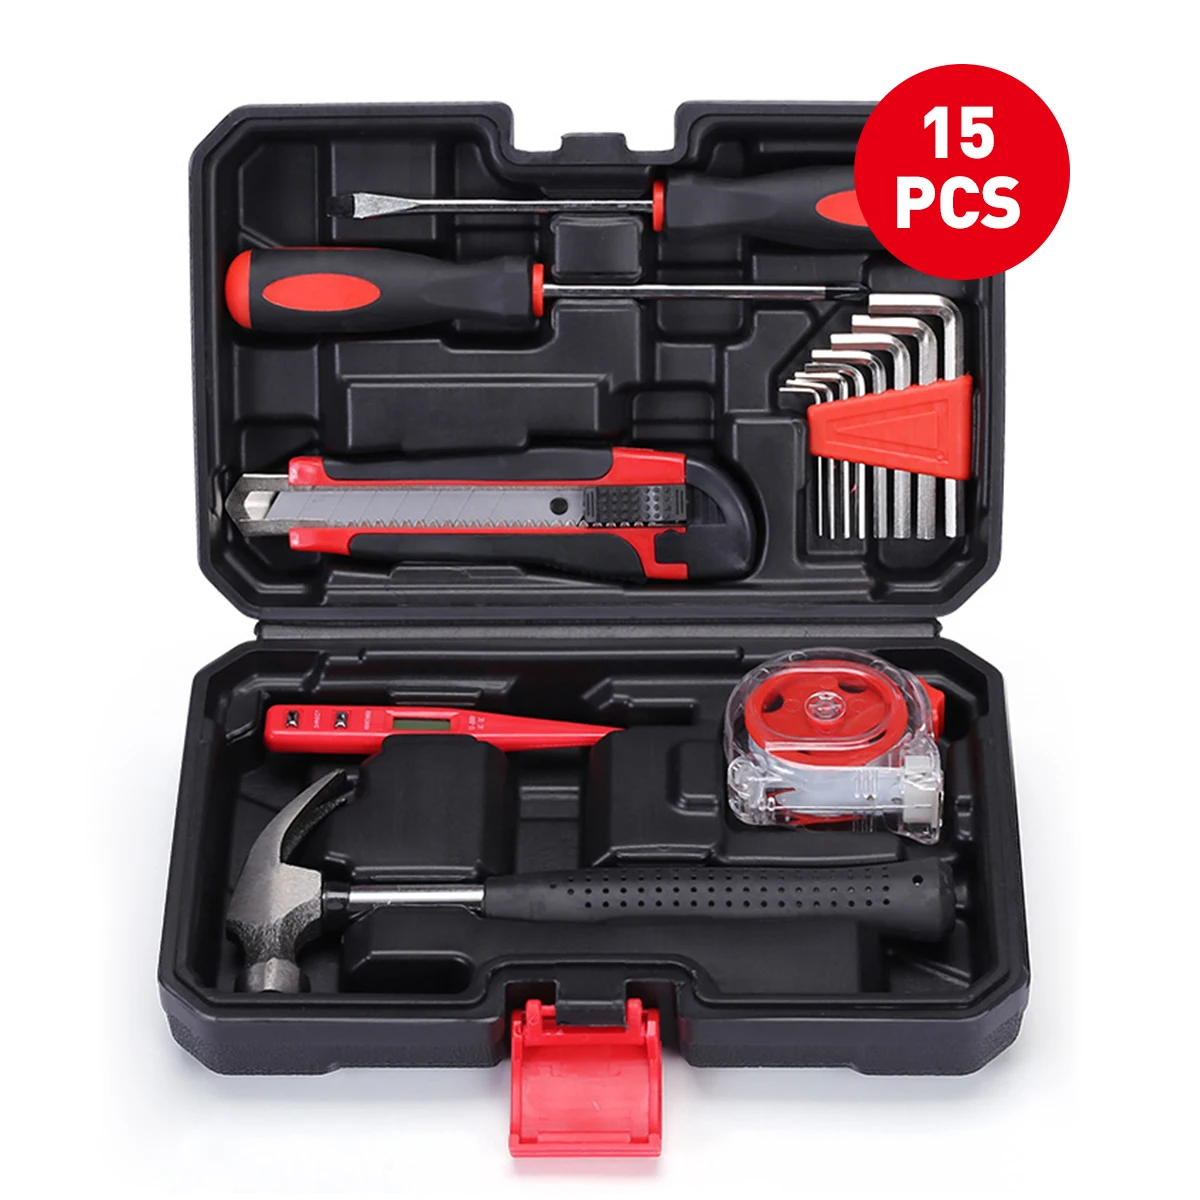 15Pcs In Package Professional Home Repair Hand Tool Set Household Hardware Combination Kit Maintenance Toolbox Gift Box